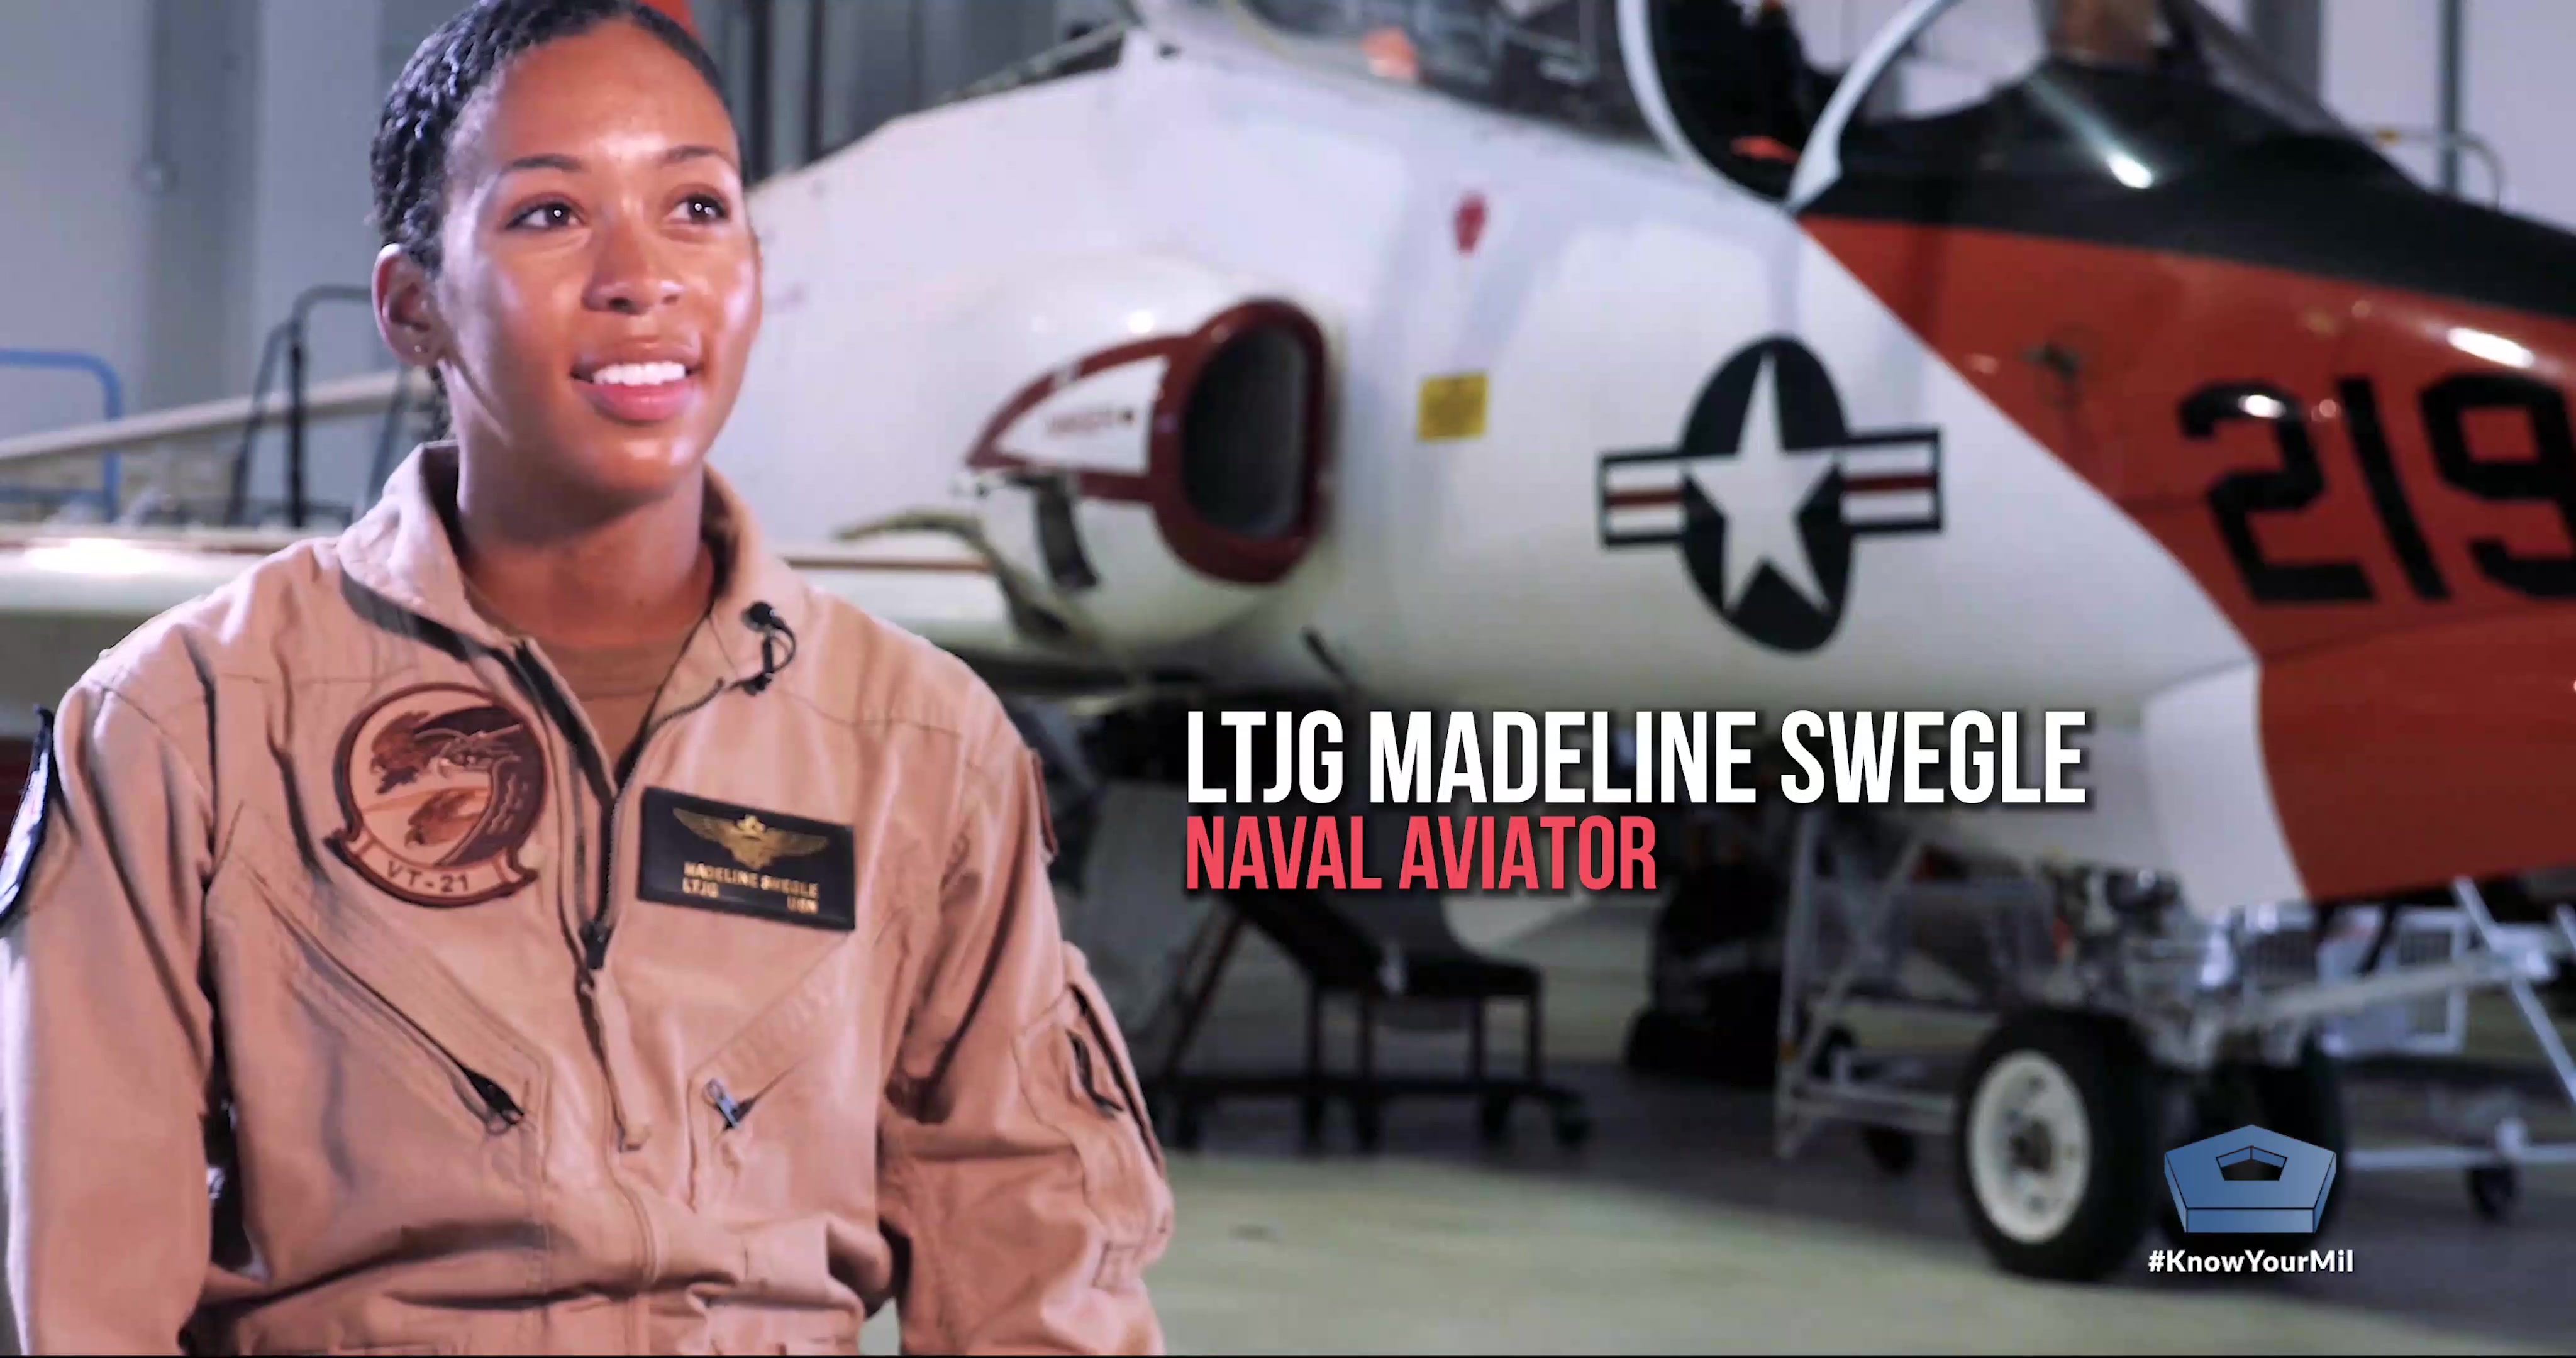 In this exclusive interview, Lt. j.g. Madeline "Maddy" Swegle talks about what it took to become the U.S. Navy's first Black female tactical jet pilot as she prepares to officially graduate from the Navy's undergraduate Tactical Air (Strike) pilot training syllabus at Naval Air Station Kingsville, Texas. 

Video by Austin Rooney, Navy